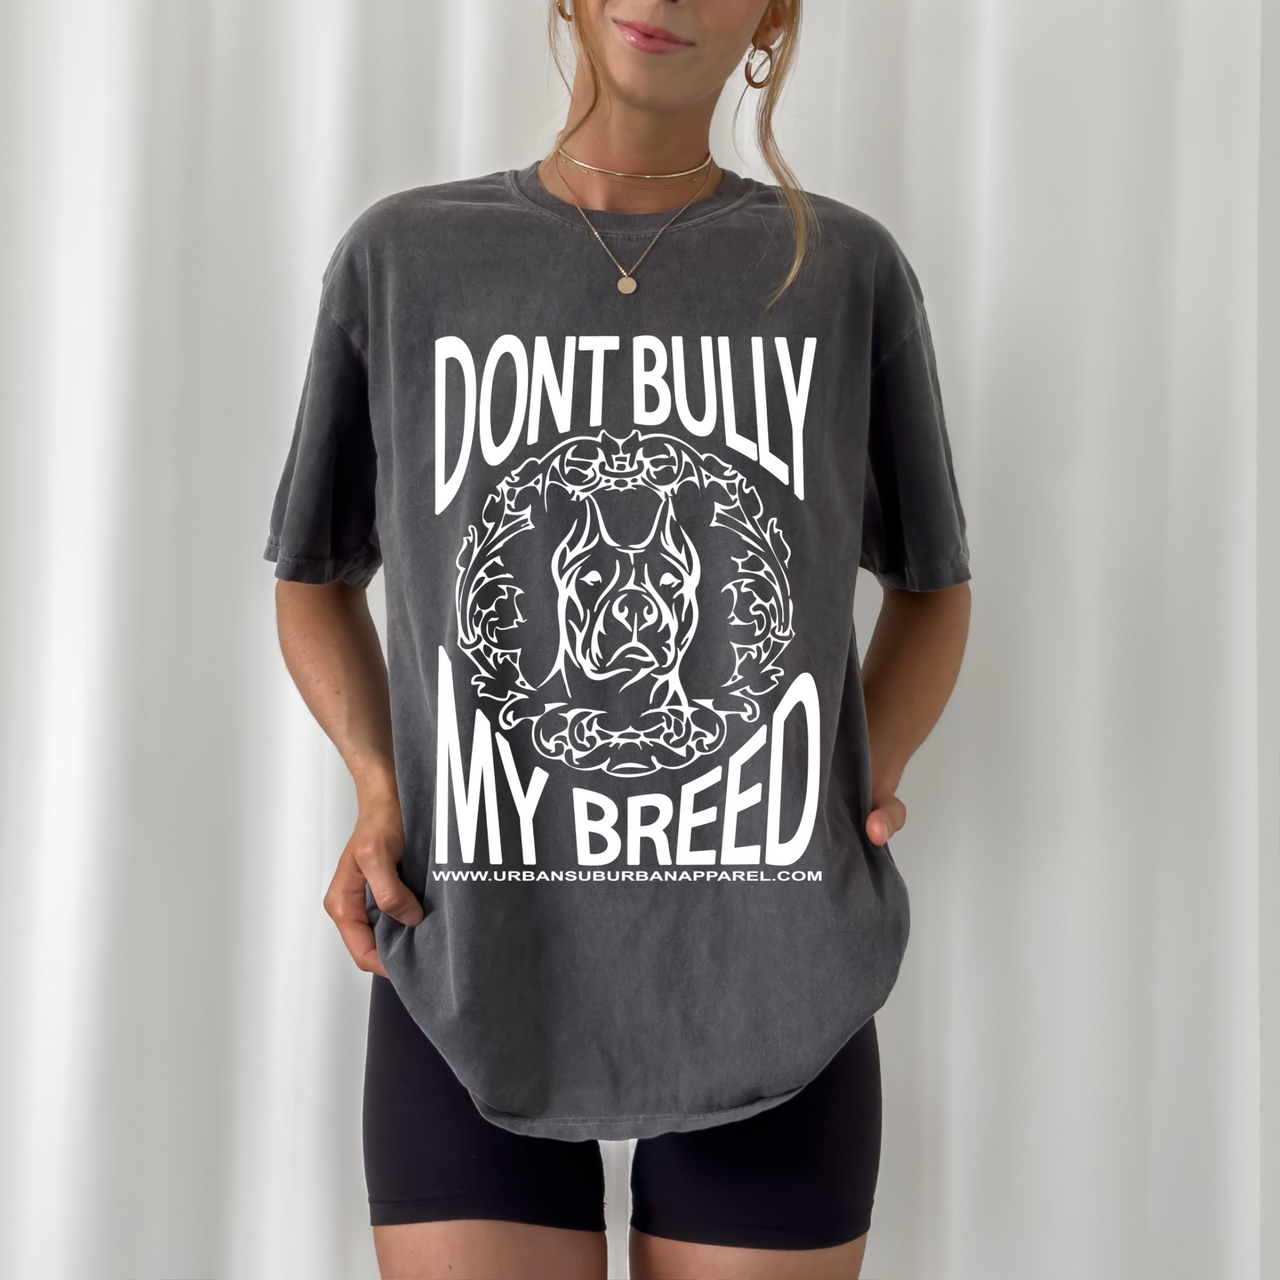 DON'T BULLY MY BREED Vintage Tee